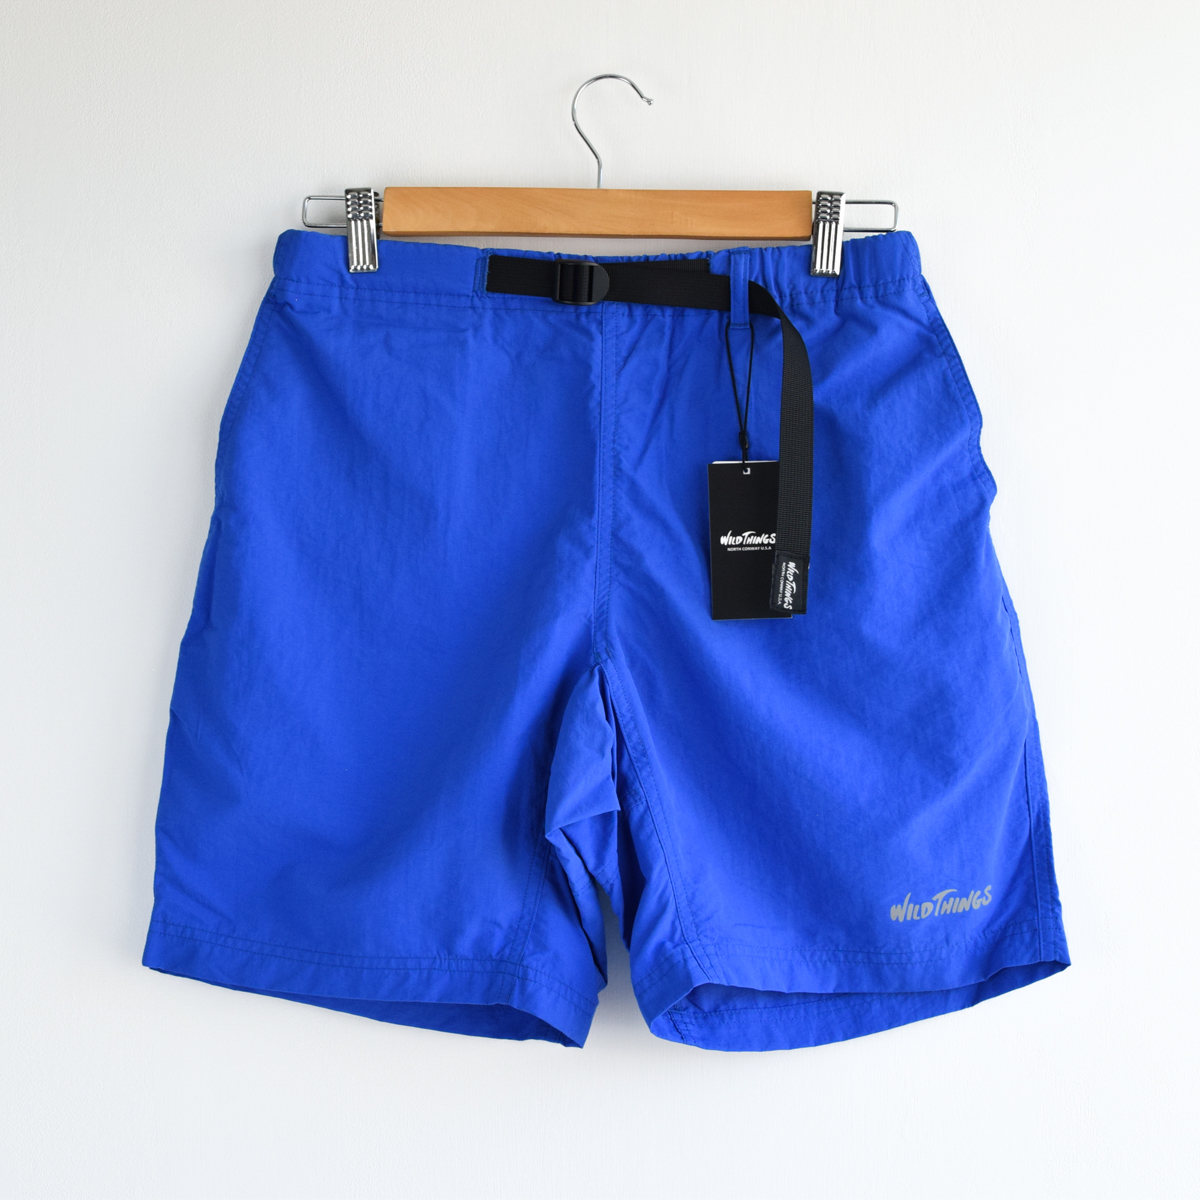  new goods WILD THINGS Wild Things water land both for nylon short pants shorts S control number F643Q483